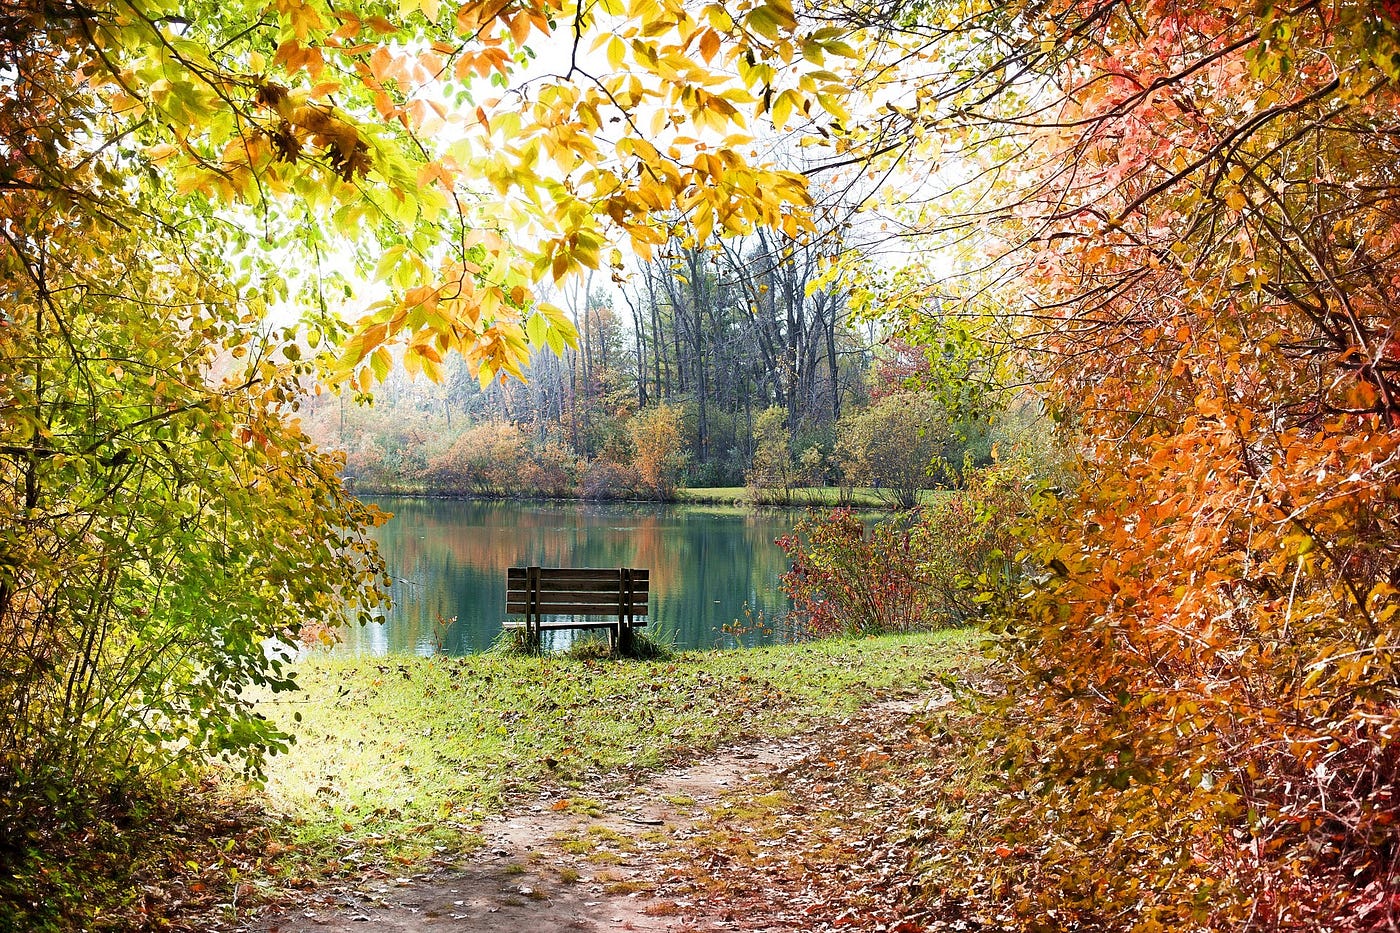 4K] Autumn Music — Piano Relaxing Music With Beautiful Nature Scenes — The  Nomandland Channel. - The Nomadland Channel - Medium